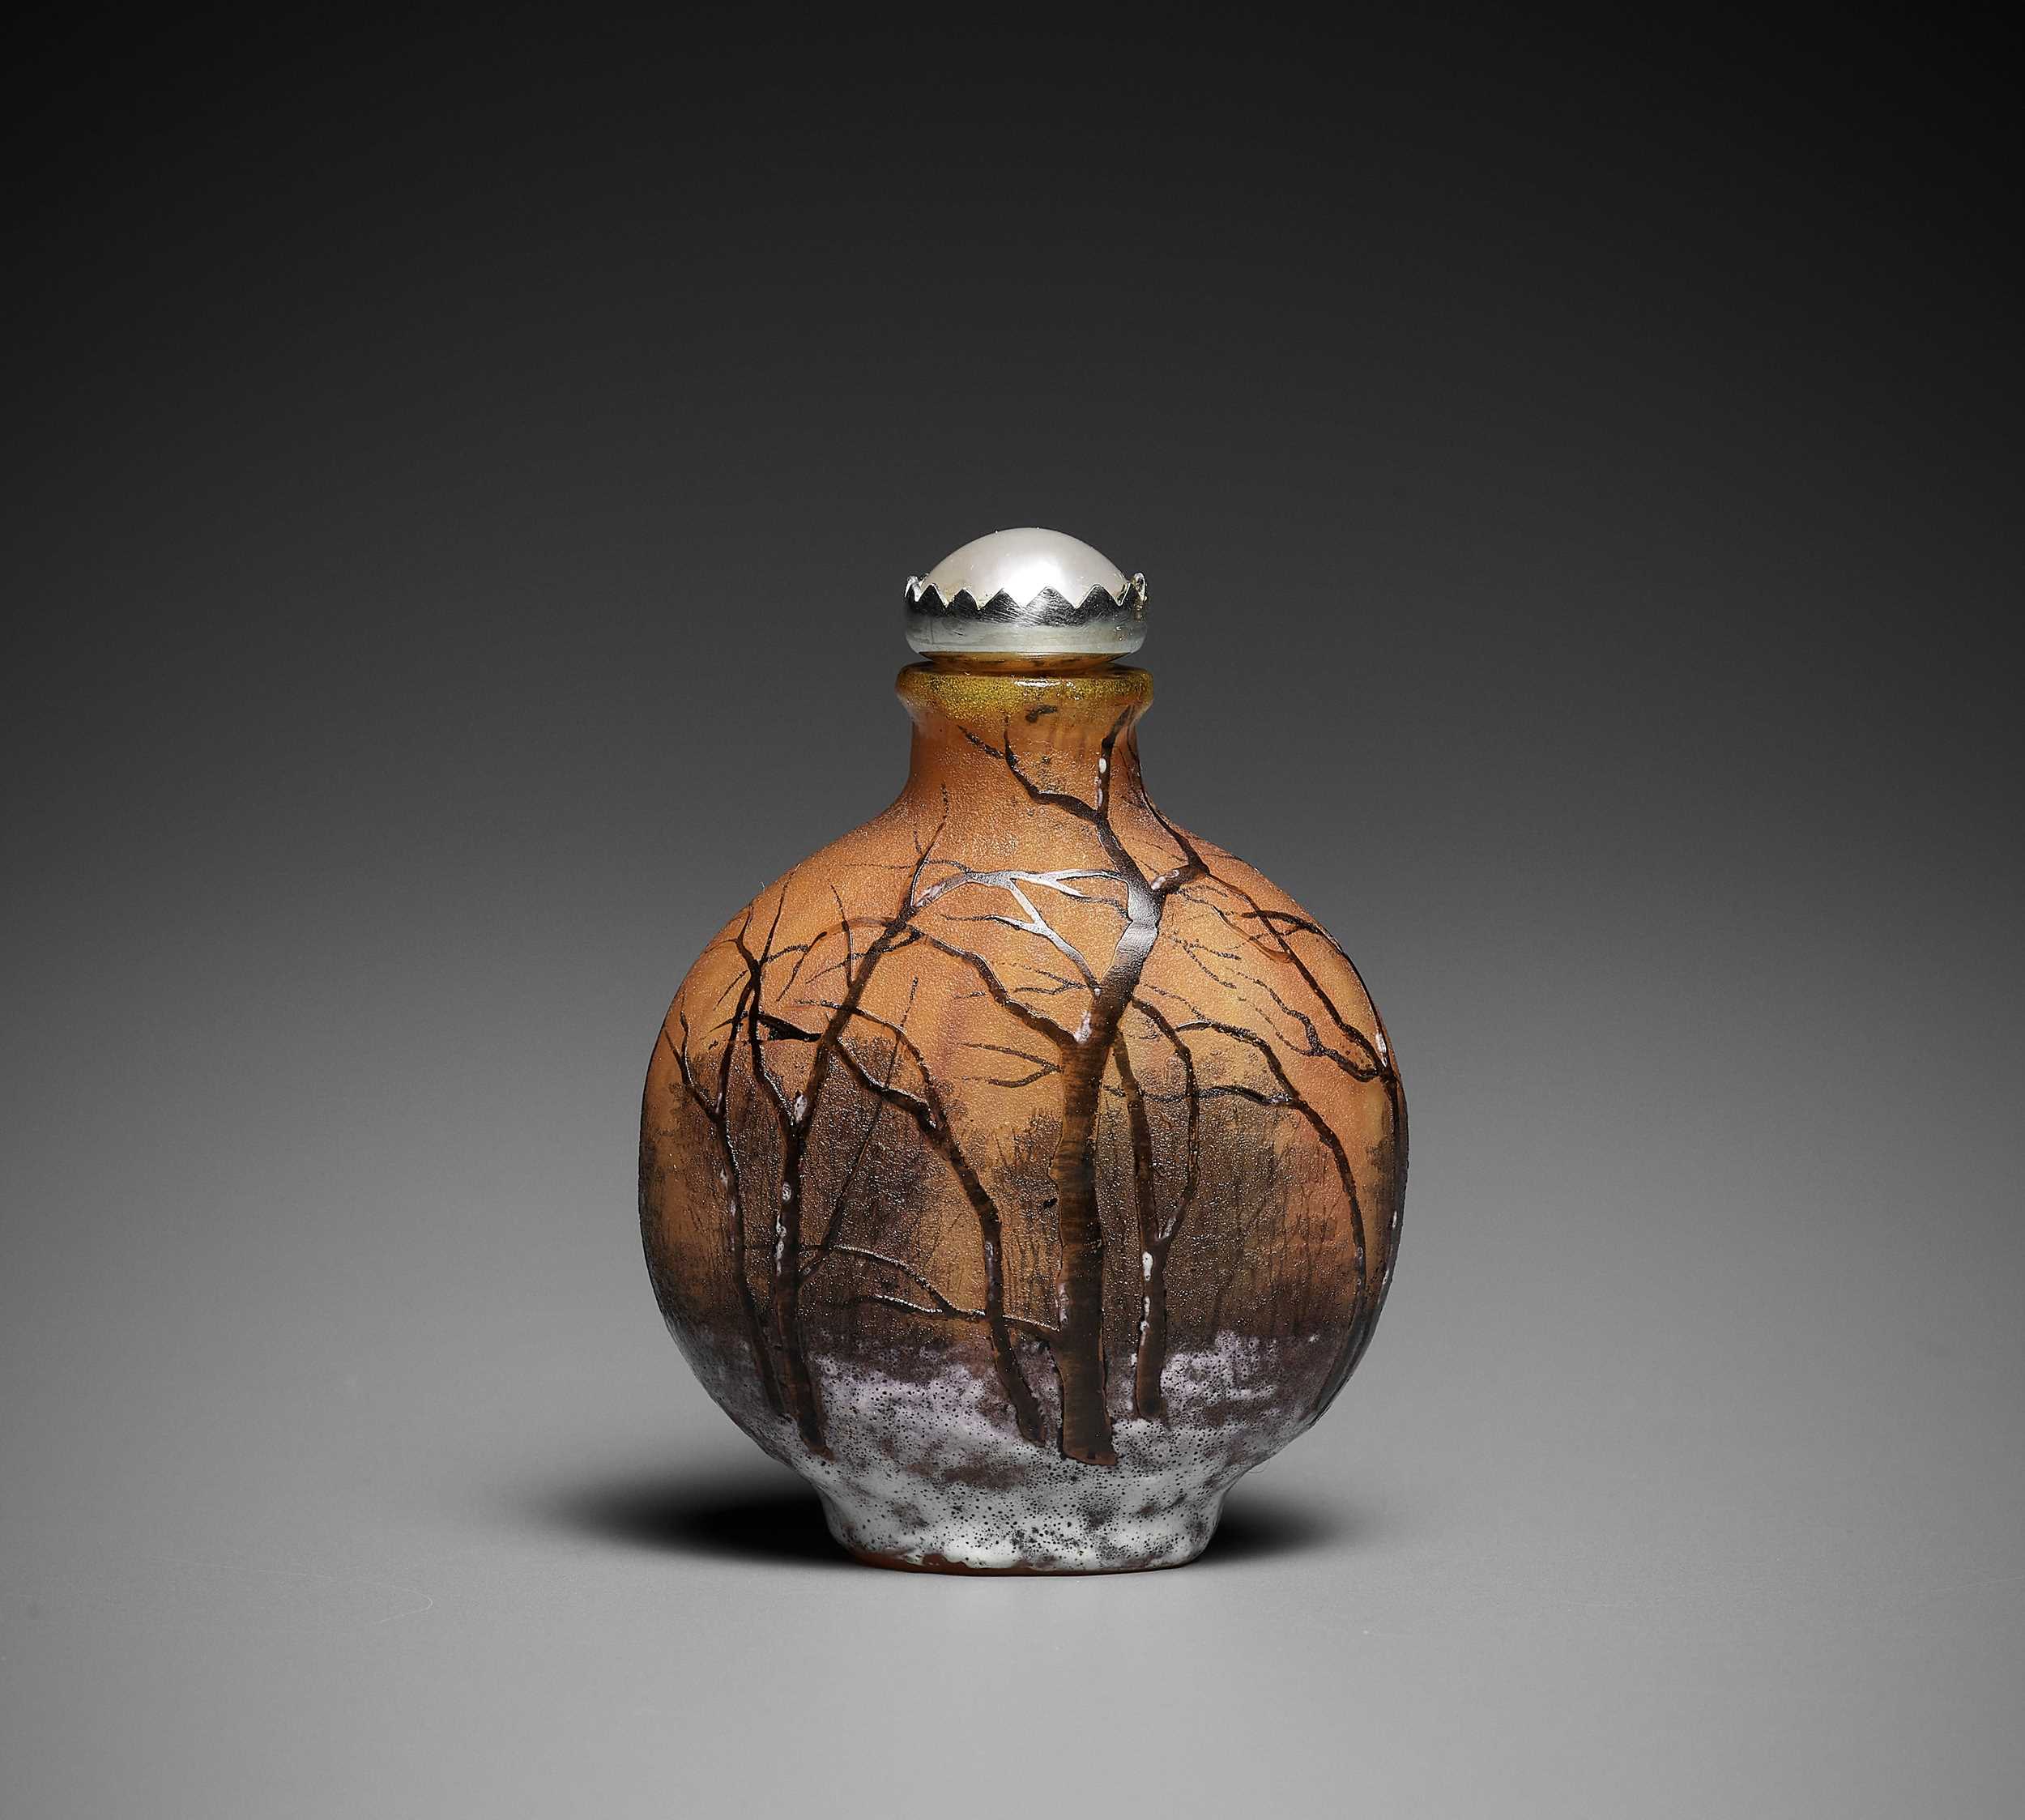 Lot 639 - AN ETCHED AND ENAMELED GLASS ‘WINTER LANDSCAPE’ SNUFF BOTTLE, BY DAUM NANCY, EARLY 20TH CENTURY